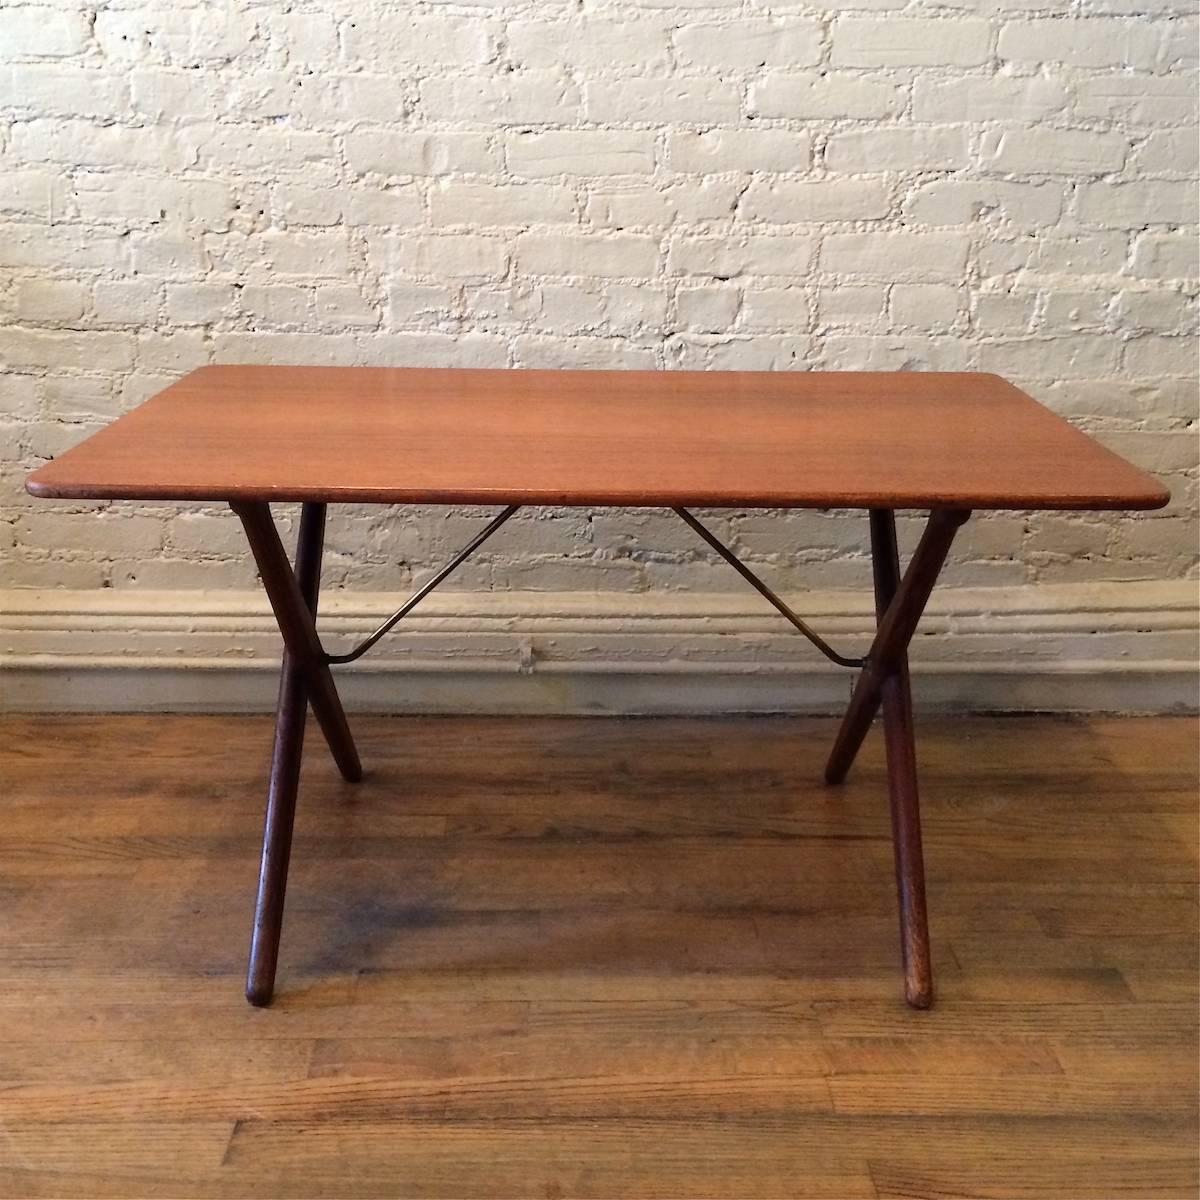 Danish modern, occasional, side or end table by Hans Wegner for Andreas Tuck with brass stretchers, teak top and oak legs.